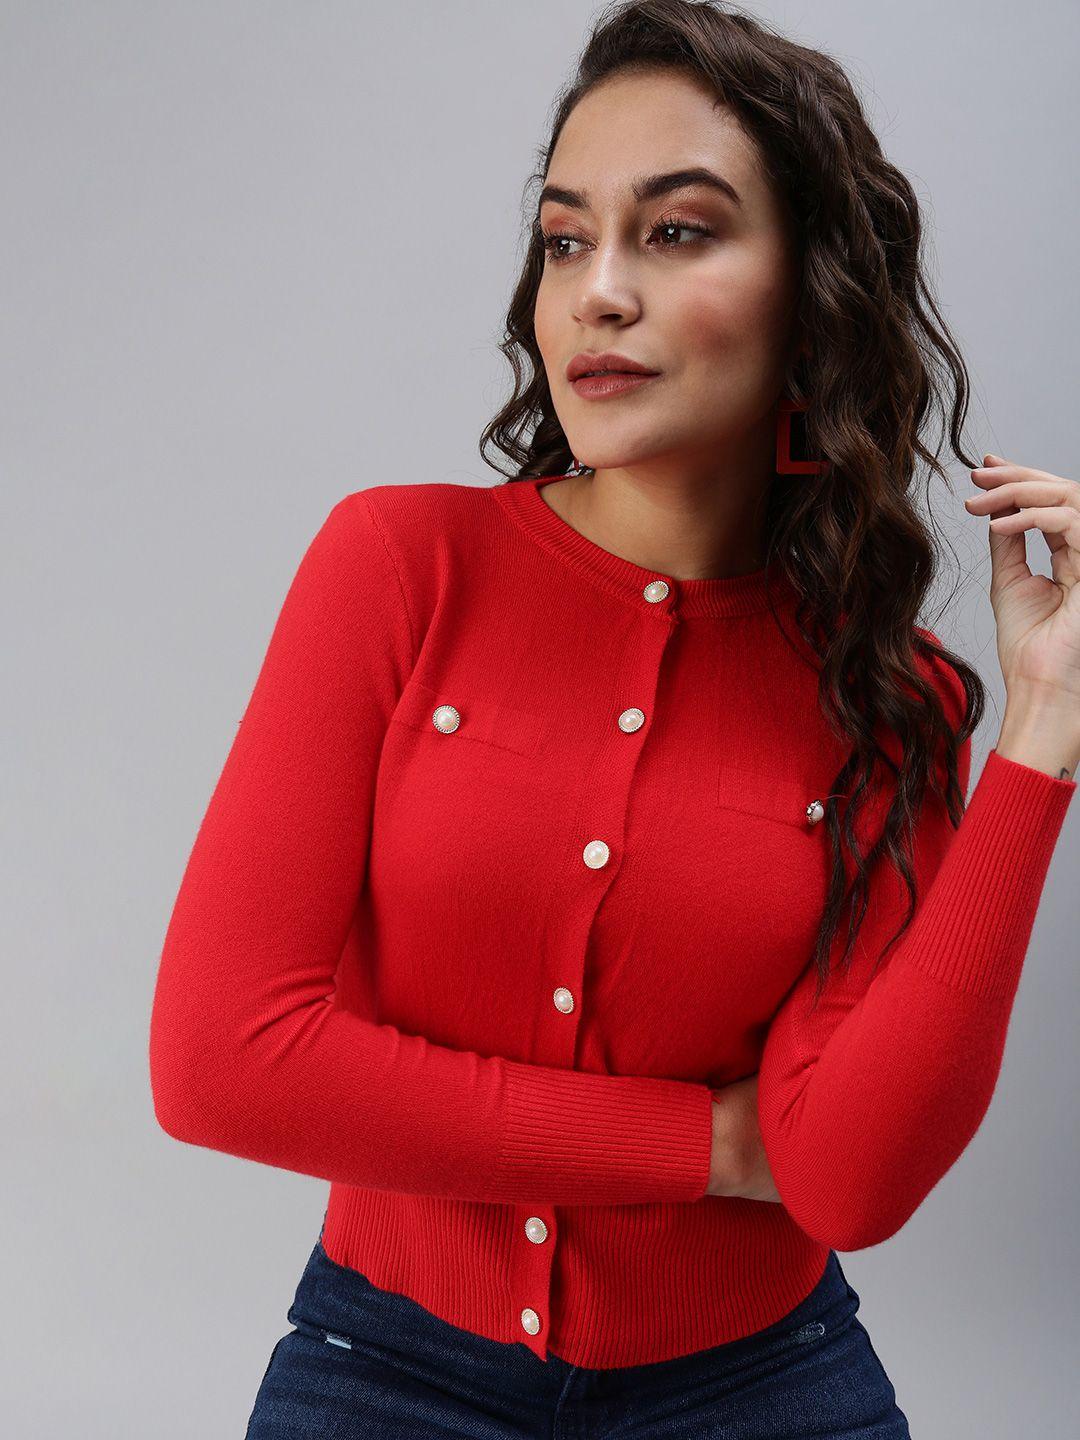 showoff red shirt style top